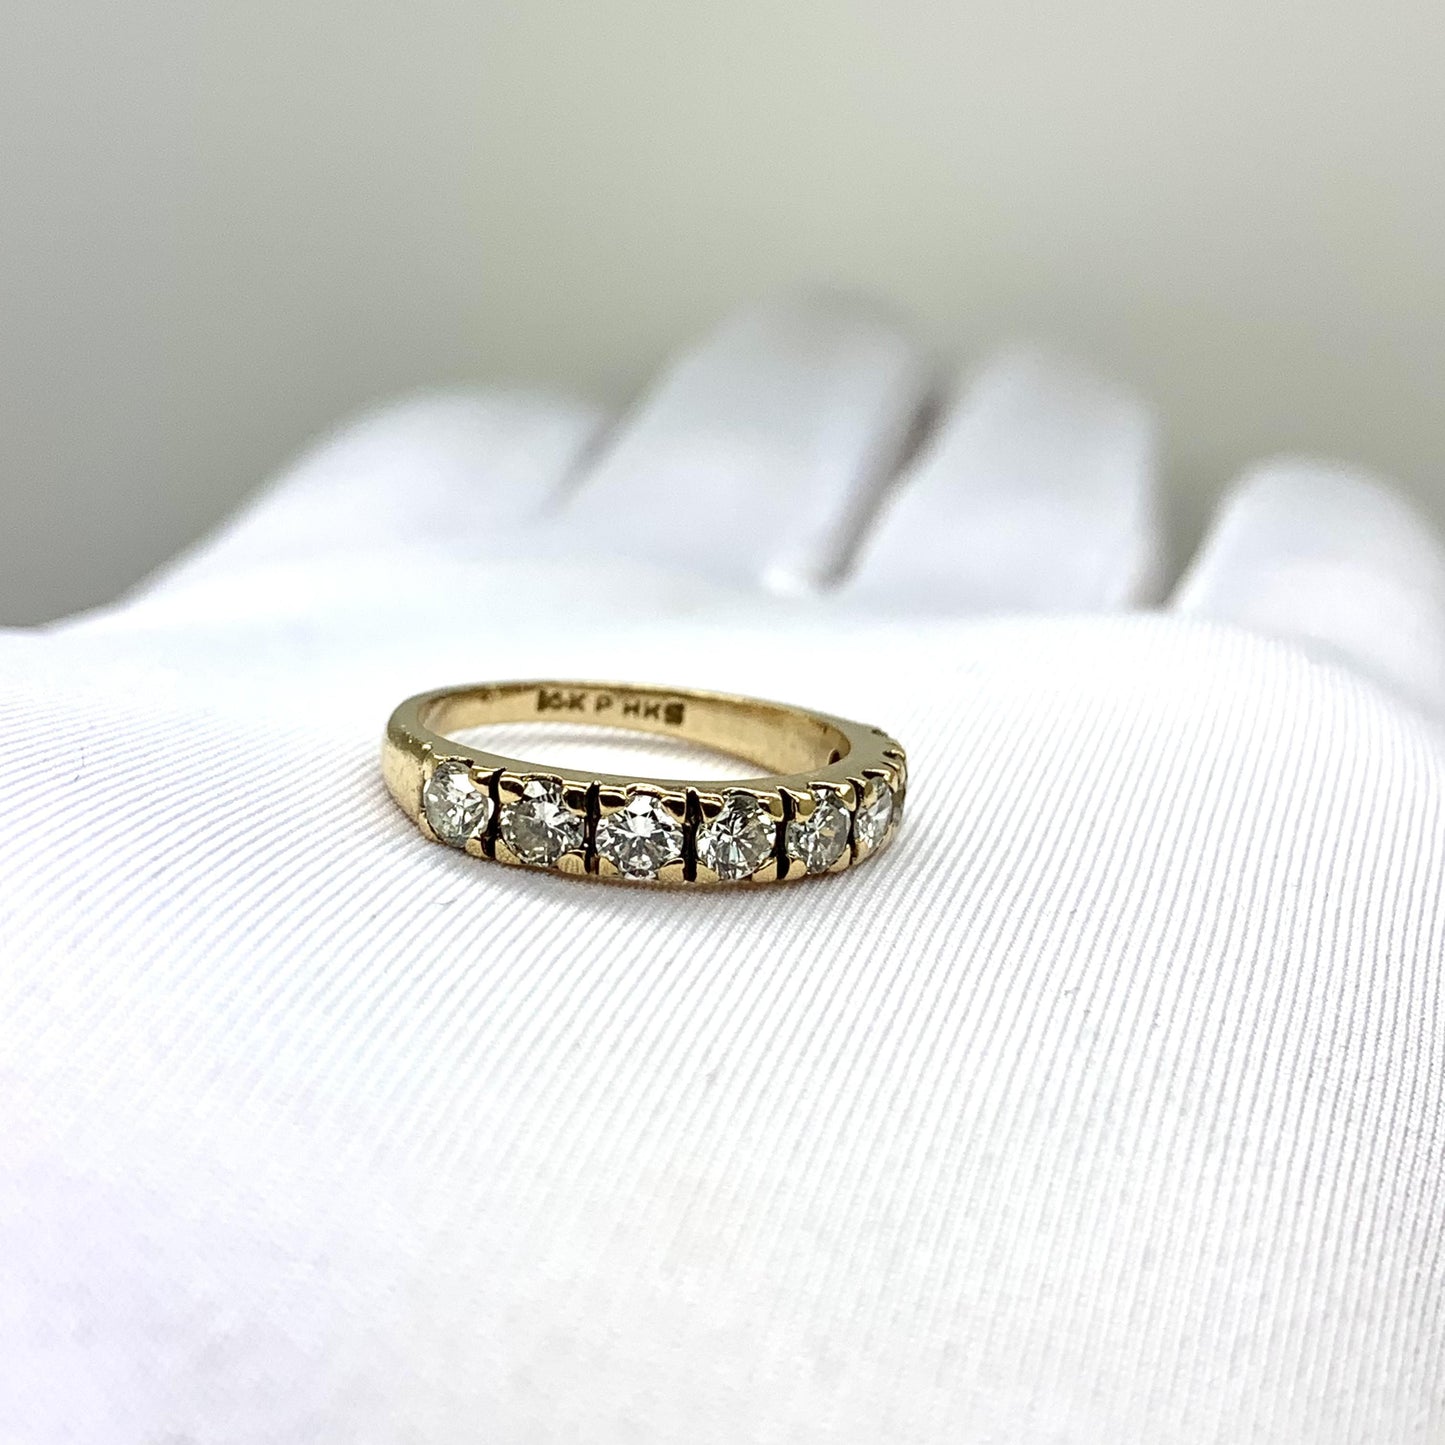 0.88 cttw White Diamond Channel Set Ring in 14k Yellow Gold 6US